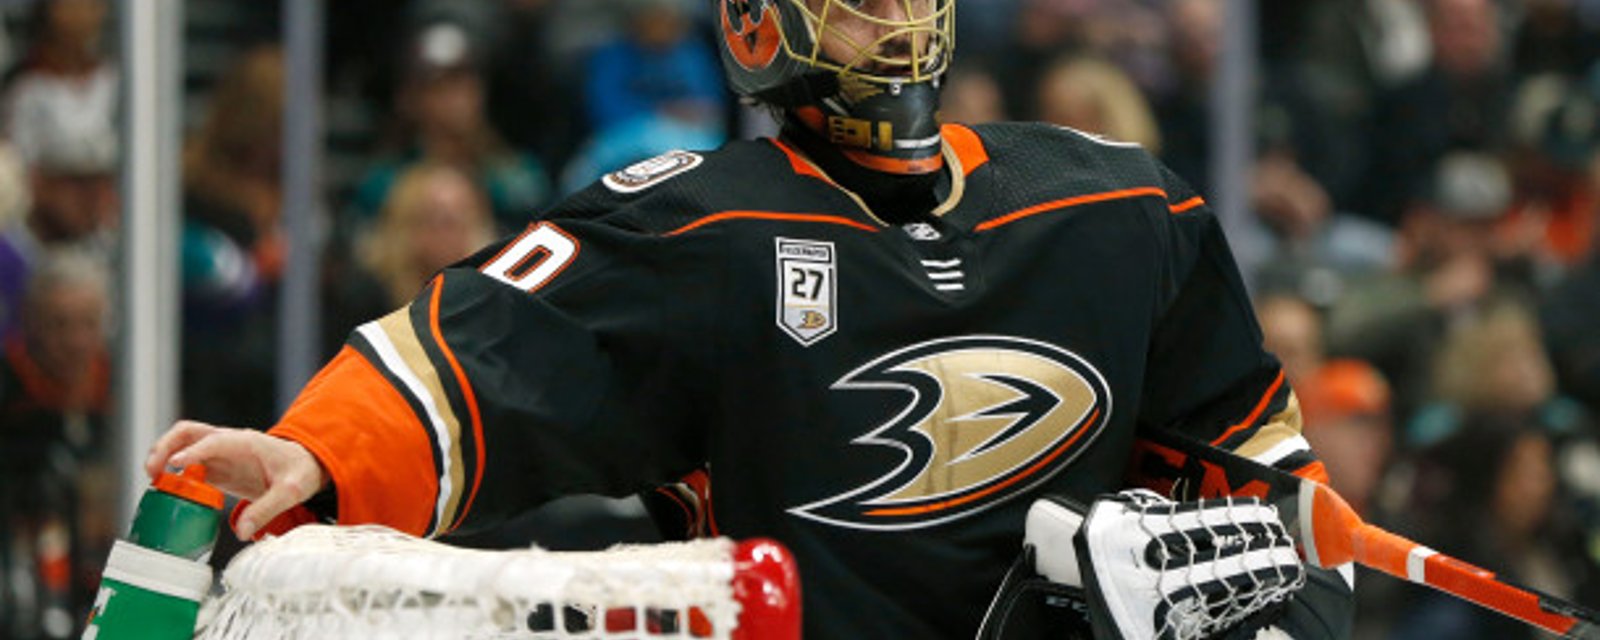 Ducks’ Miller makes classy move to rival Bobby Ryan before the game